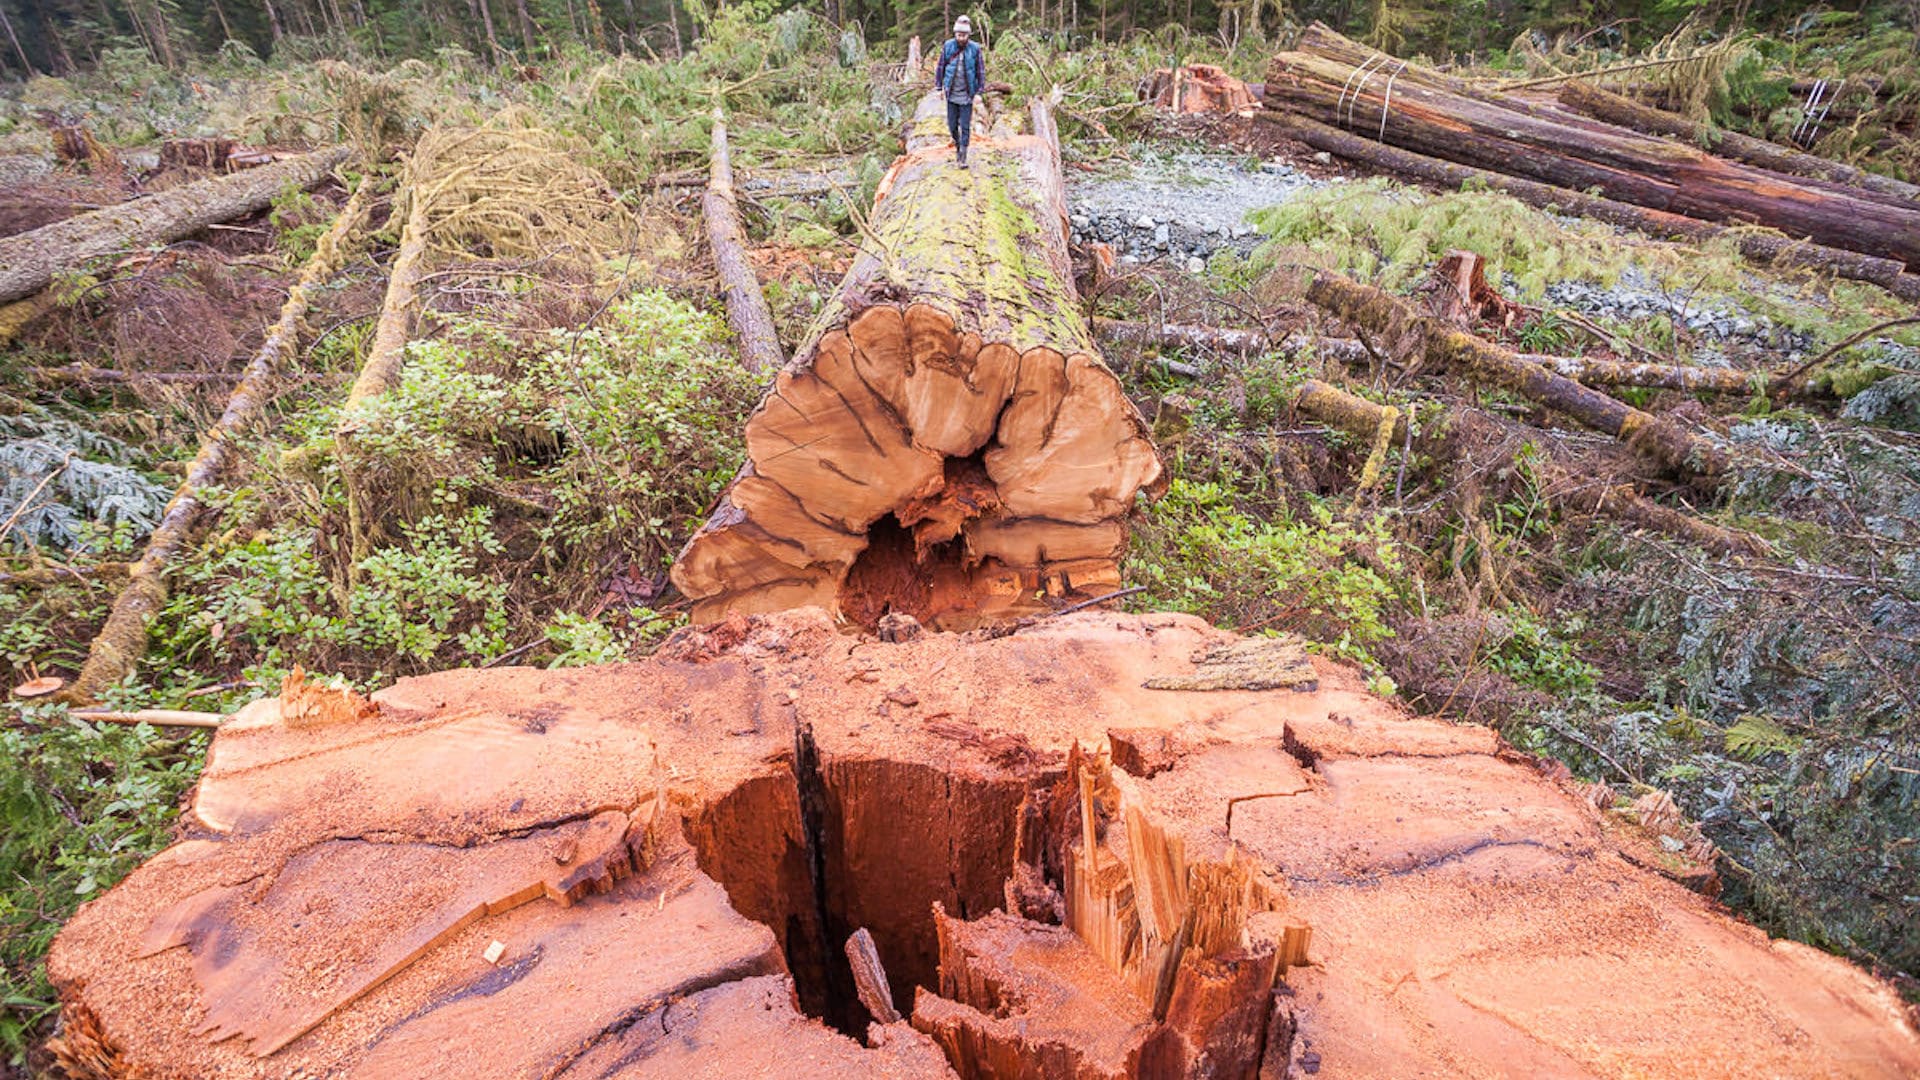 MLA COLUMN: Can't see the forest for the trees